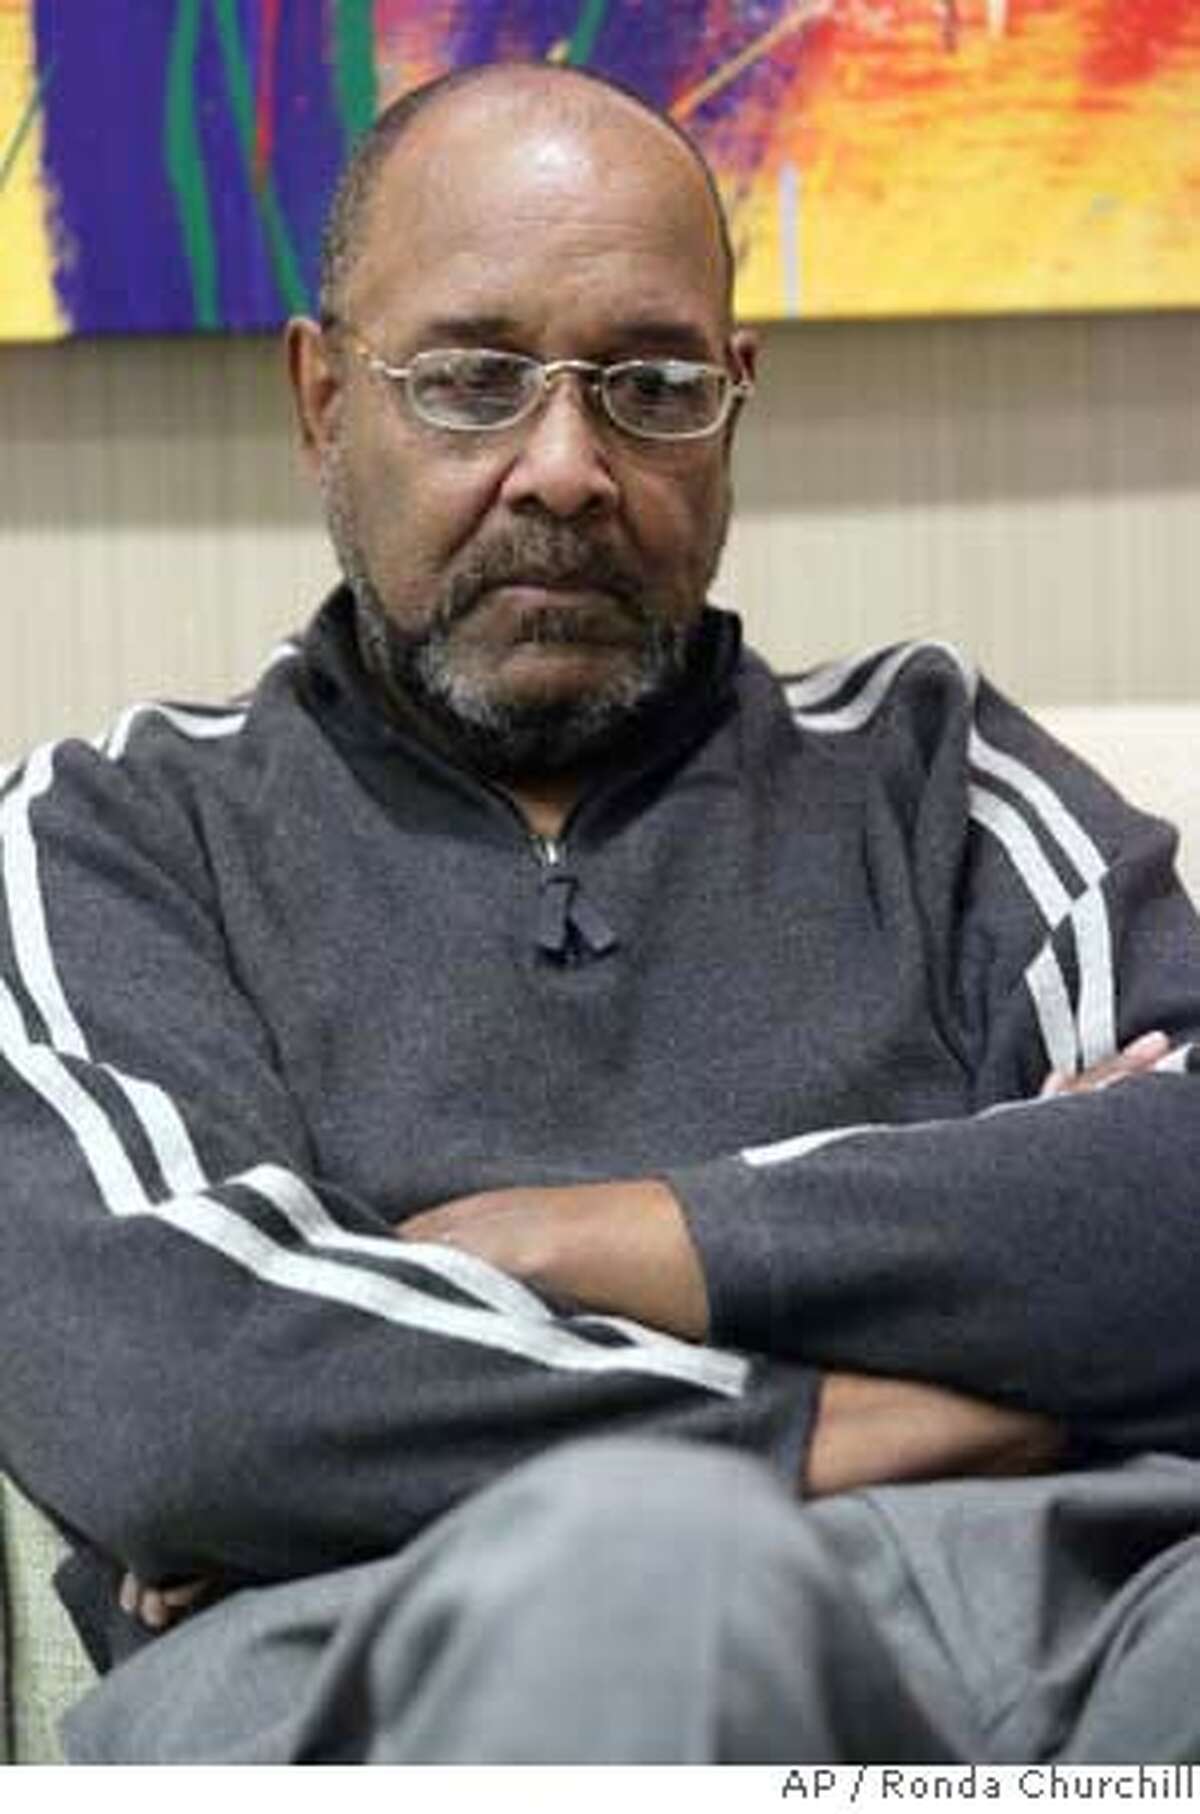 ###Live Caption:Michael Washington, 67, pauses while talking about living with hepatitis C during an interview with the Associated Press at Edward Bernstein & Associates law offices Tuesday, March 4, 2008, in Las Vegas. Washington believes he contracted hepatitis C while having a preventative colon examine at the Endoscopy Center of Southern Nevada last July. (AP Photo/ Ronda Churchill)###Caption History:Michael Washington, 67, pauses while talking about living with hepatitis C during an interview with the Associated Press at Edward Bernstein & Associates law offices Tuesday, March 4, 2008, in Las Vegas. Washington believes he contracted hepatitis C while having a preventative colon examine at the Endoscopy Center of Southern Nevada last July. (AP Photo/ Ronda Churchill)###Notes:MICHAEL WASHINGTON###Special Instructions: